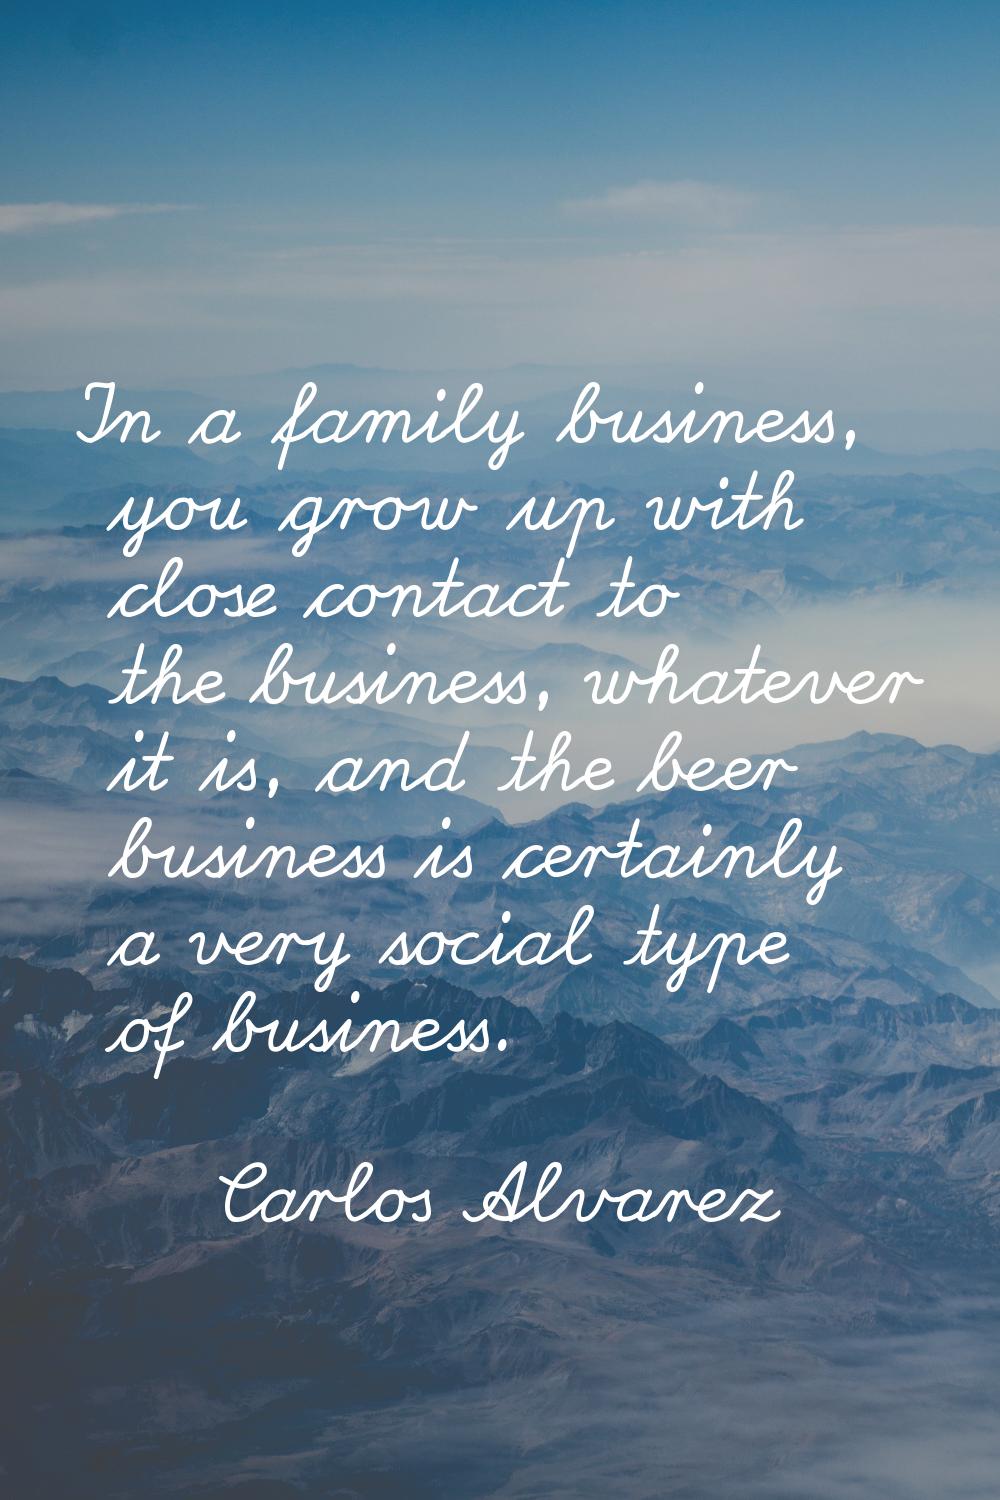 In a family business, you grow up with close contact to the business, whatever it is, and the beer 